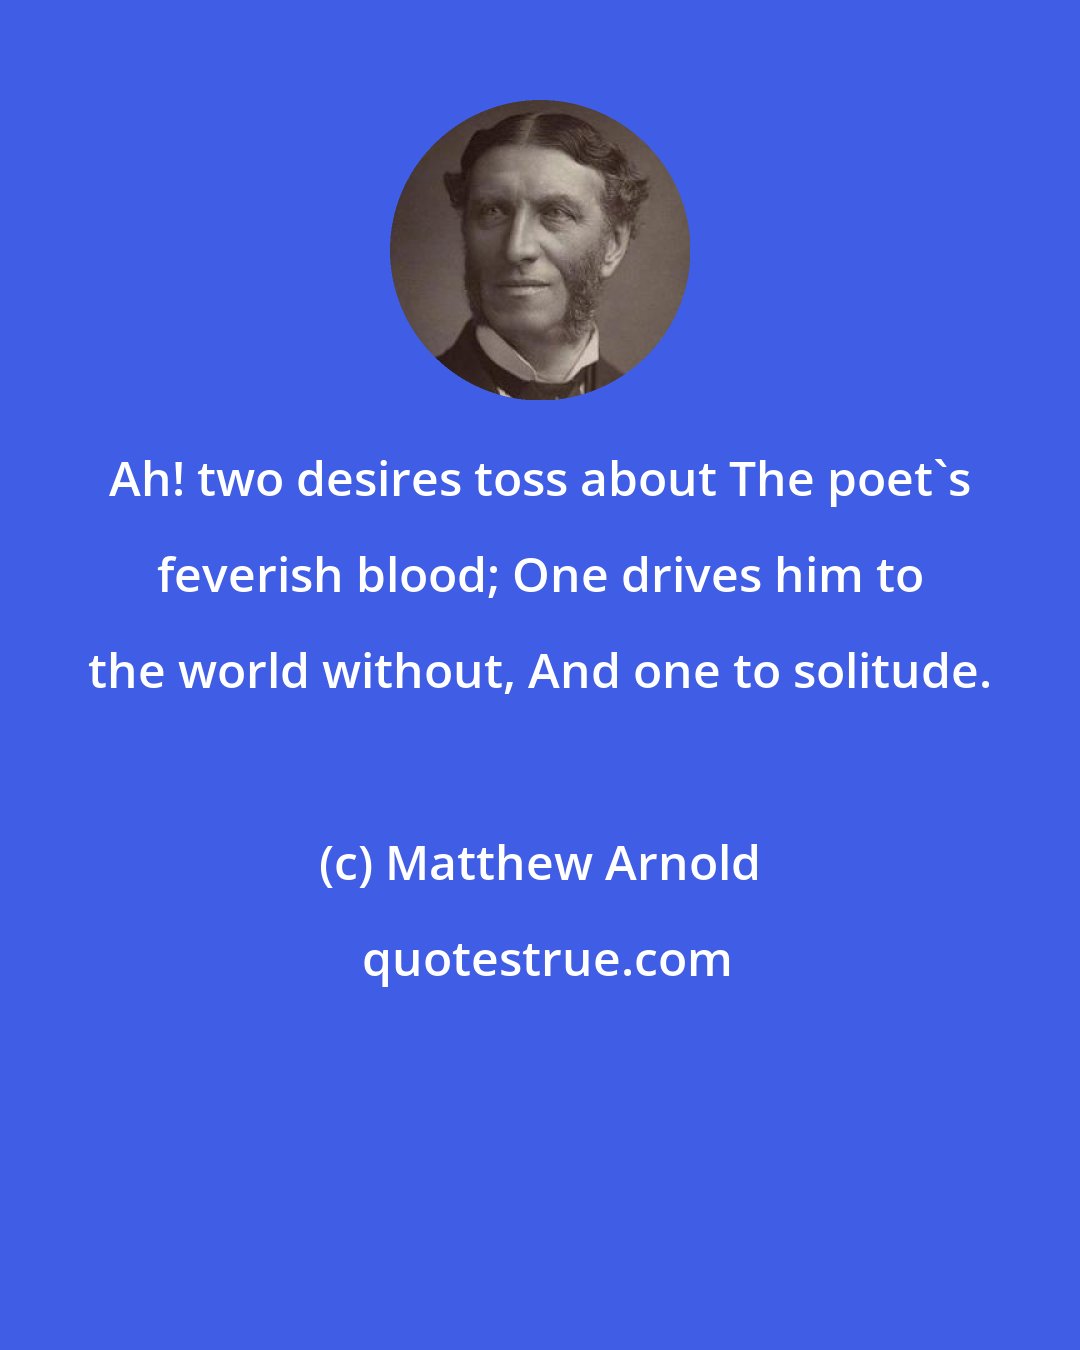 Matthew Arnold: Ah! two desires toss about The poet's feverish blood; One drives him to the world without, And one to solitude.